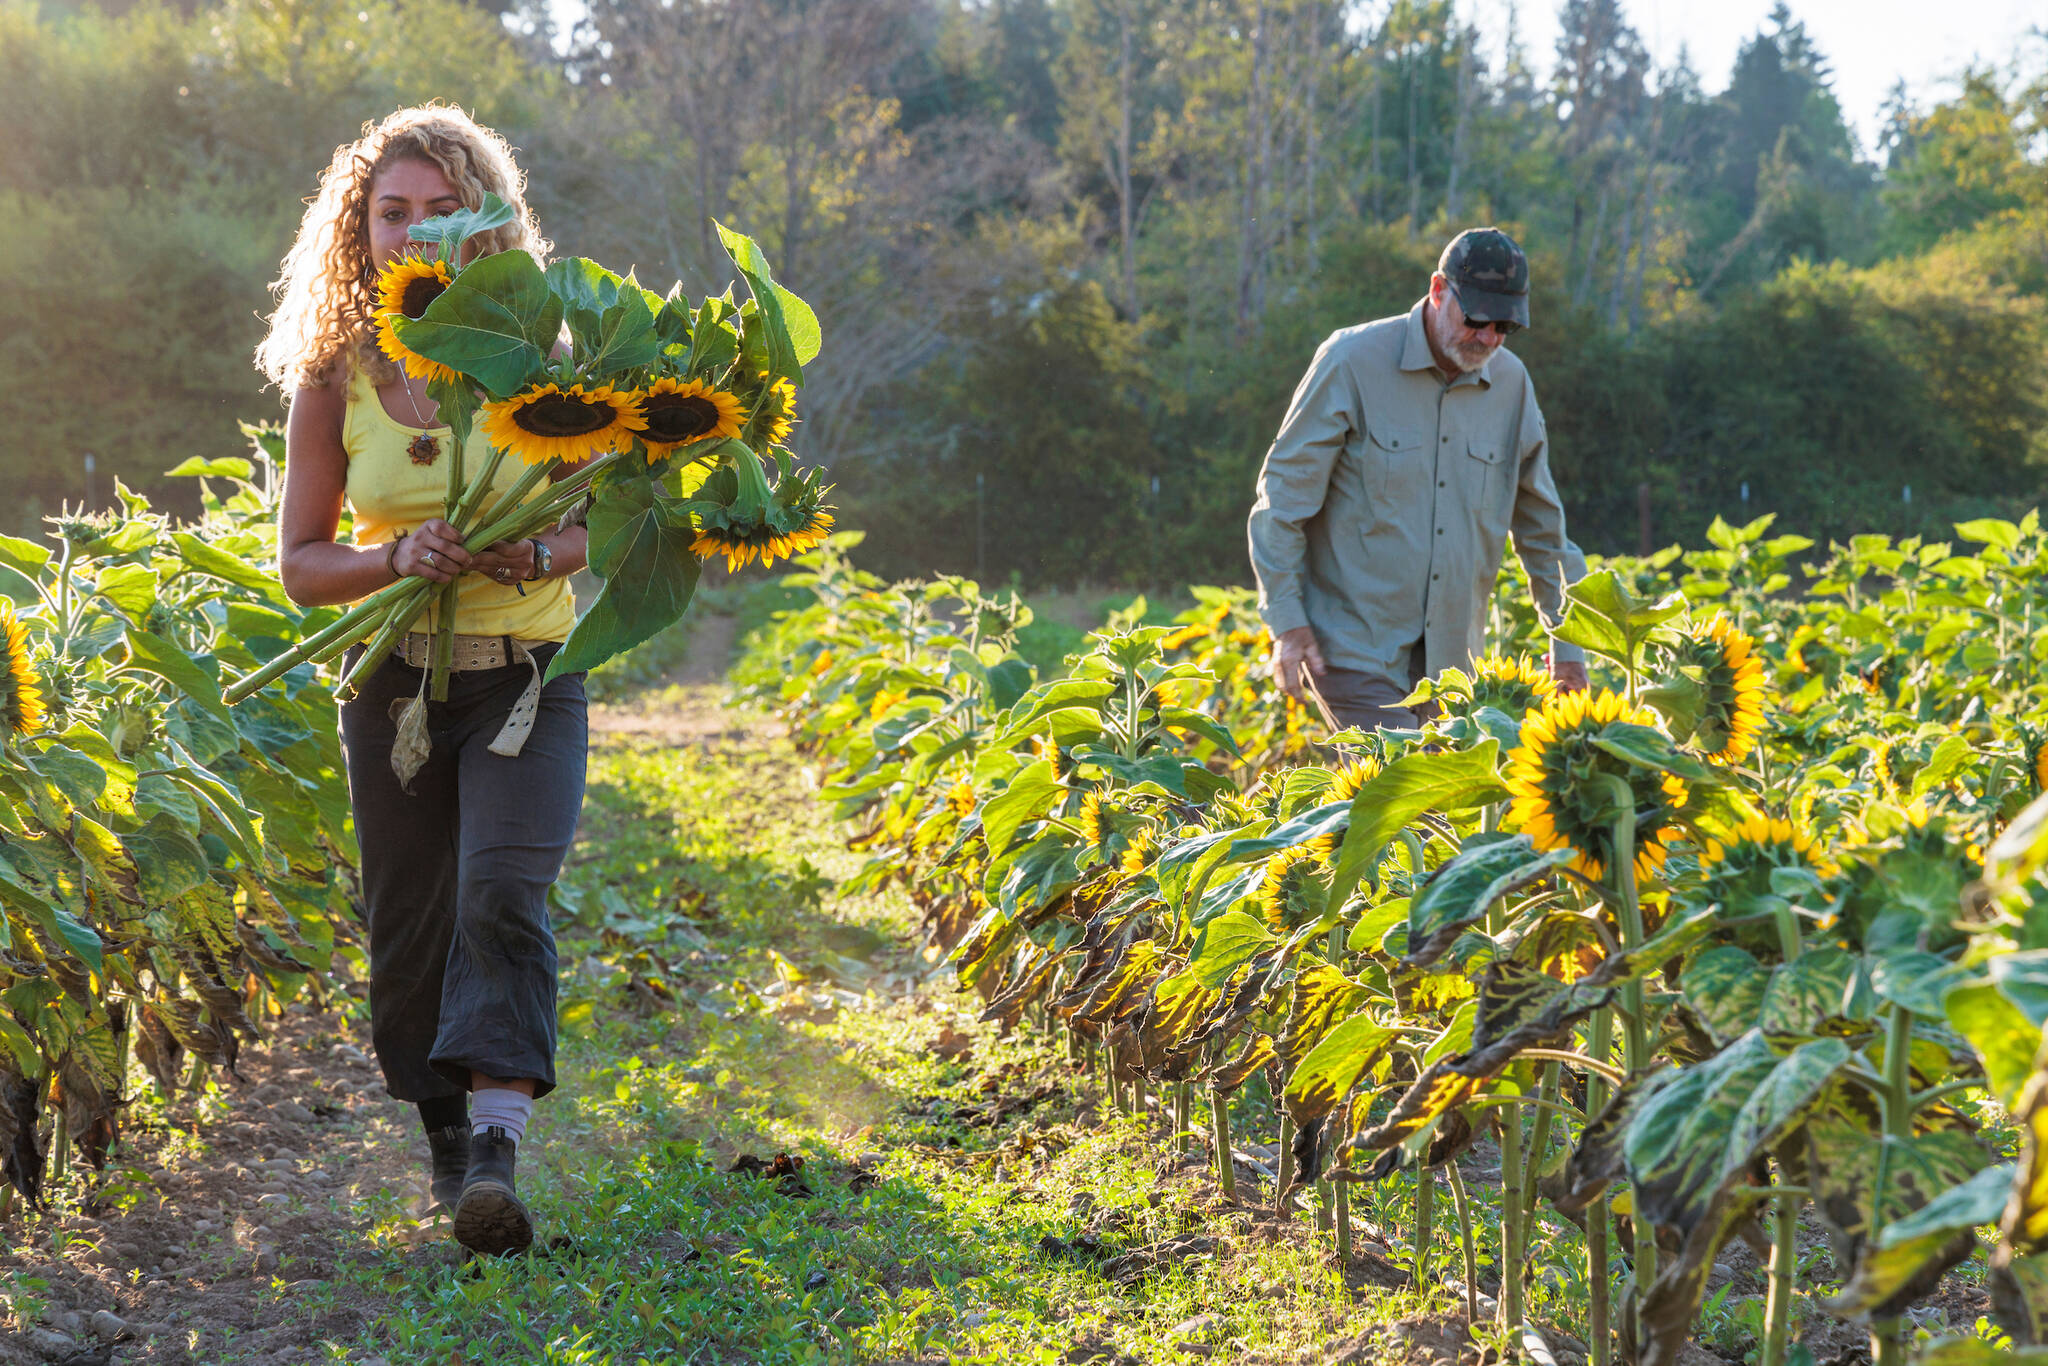 MiddleField Farm manager Brian MacWhorter walks through a field of sunflowers while an intern takes cut flowers from the field.